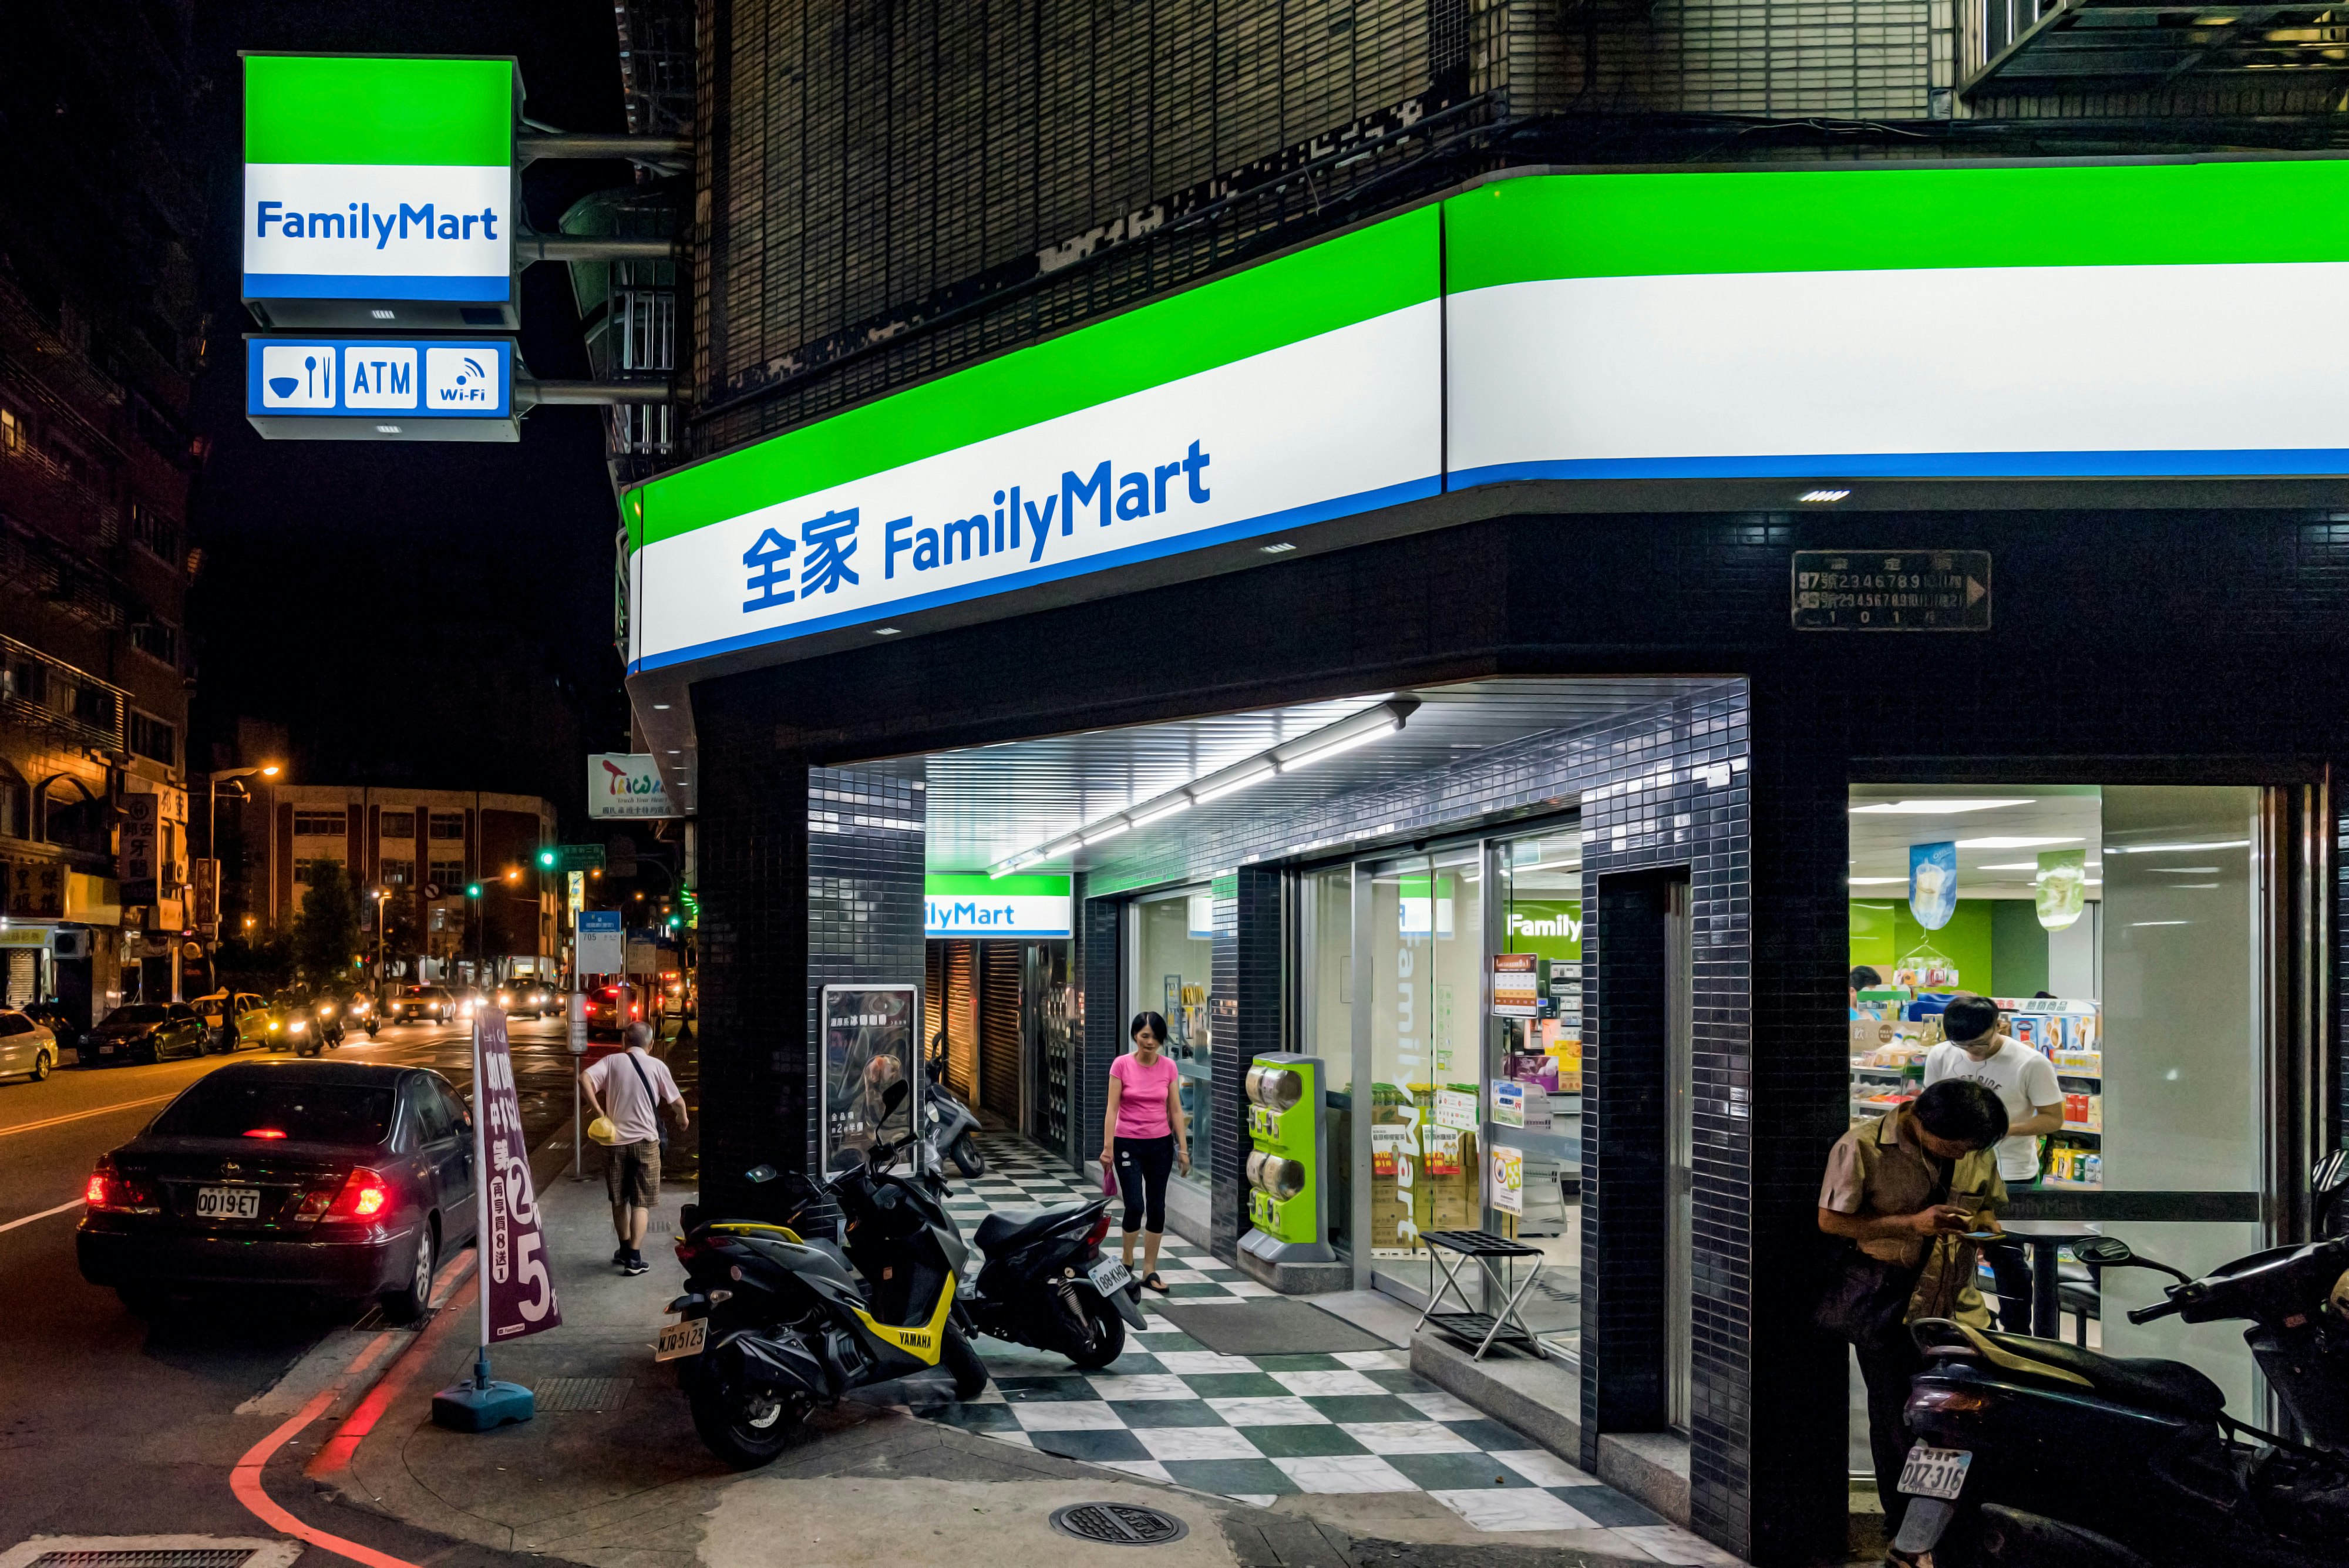 People outside of a brightly lit Family Mart convenience store in Taipei at night